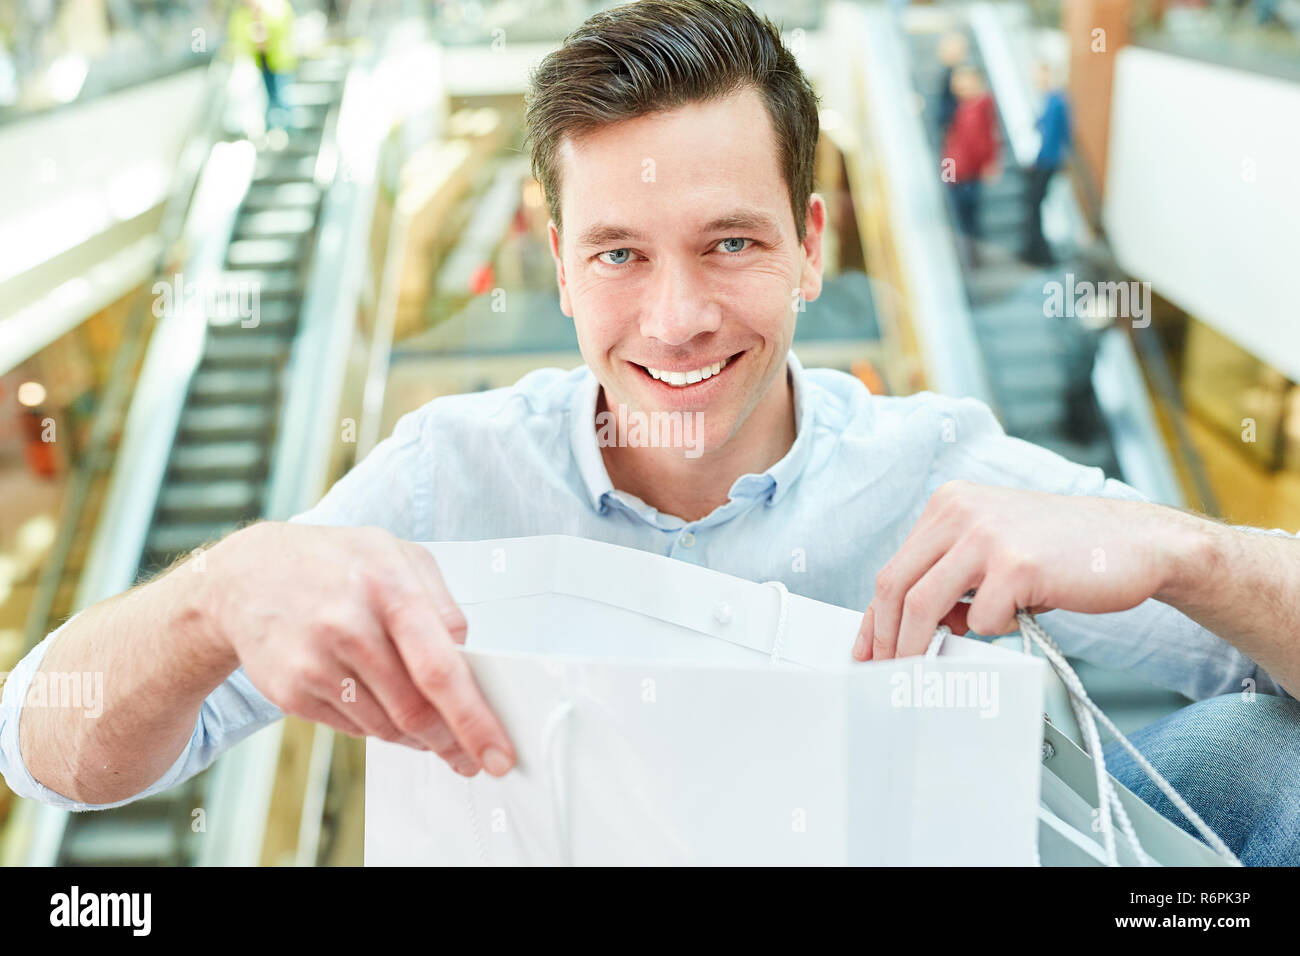 Happy man as a customer and consumer with grocery bag while shopping Stock Photo